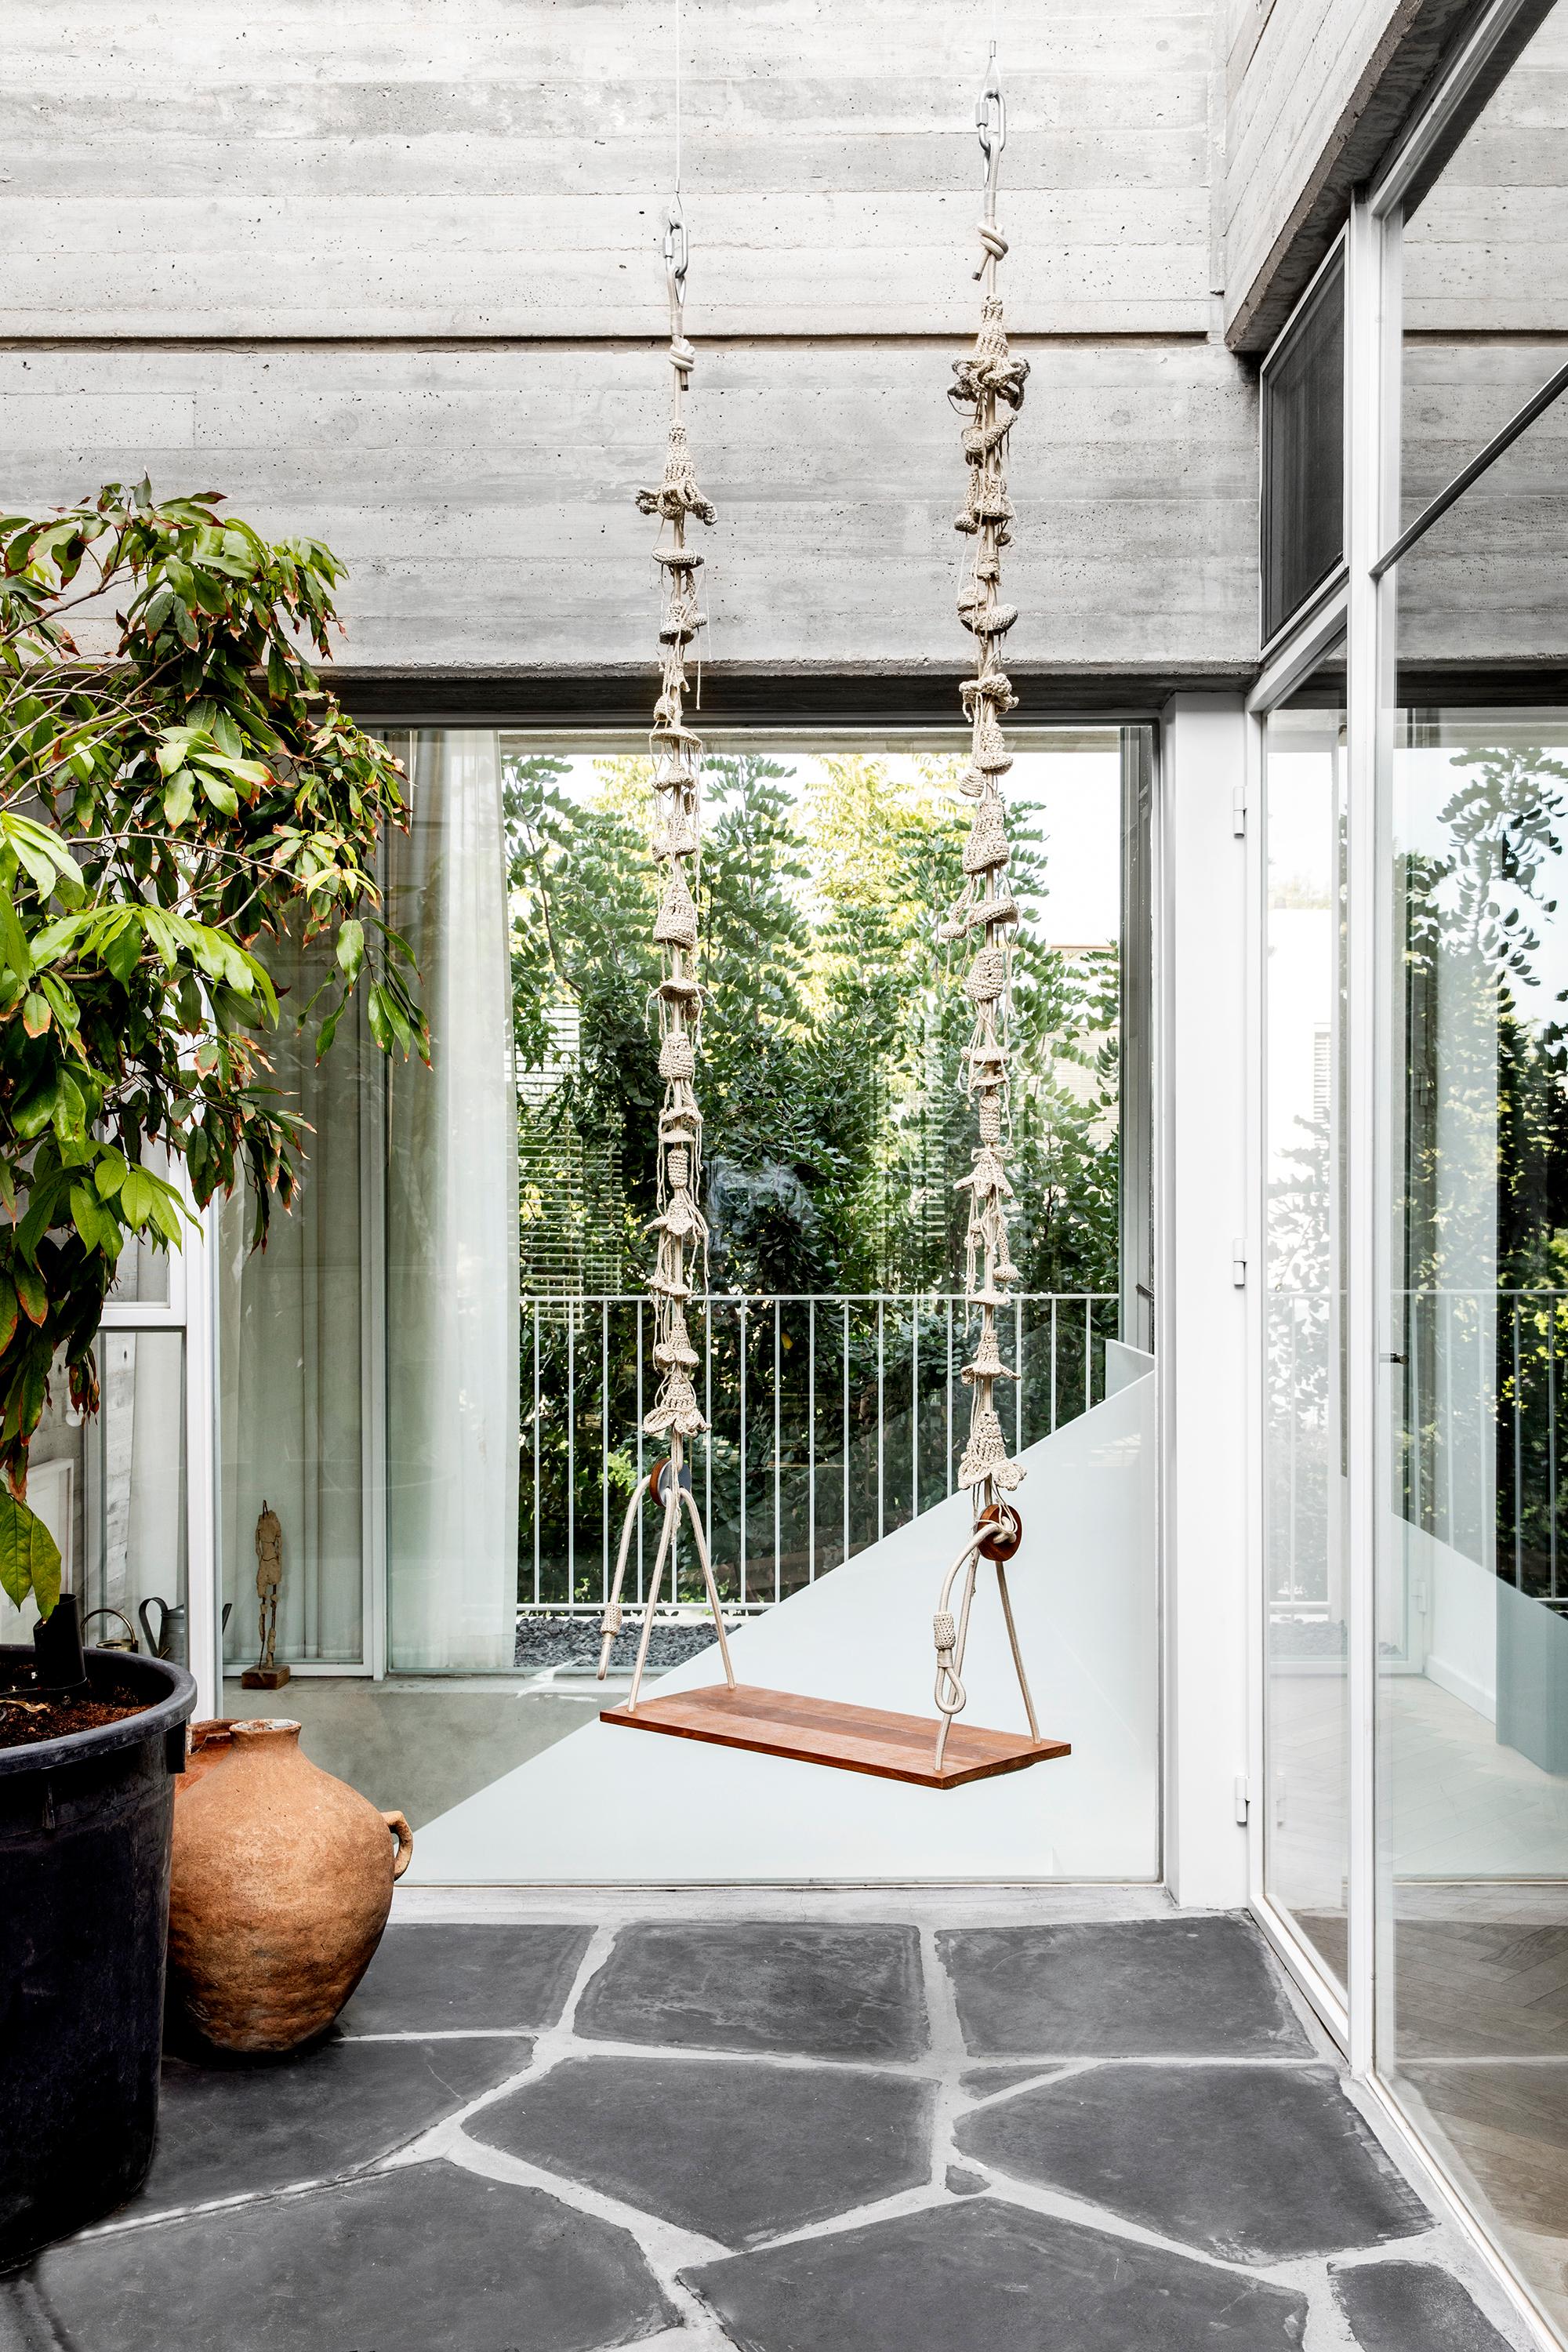 These swings are light, dreamy and perfect for enjoying the outdoors. They are composed of nearly 100 handcrafted elements from a signature UV protected yarn, designed and produced exclusively by iota. The seat of the swing is made of teak